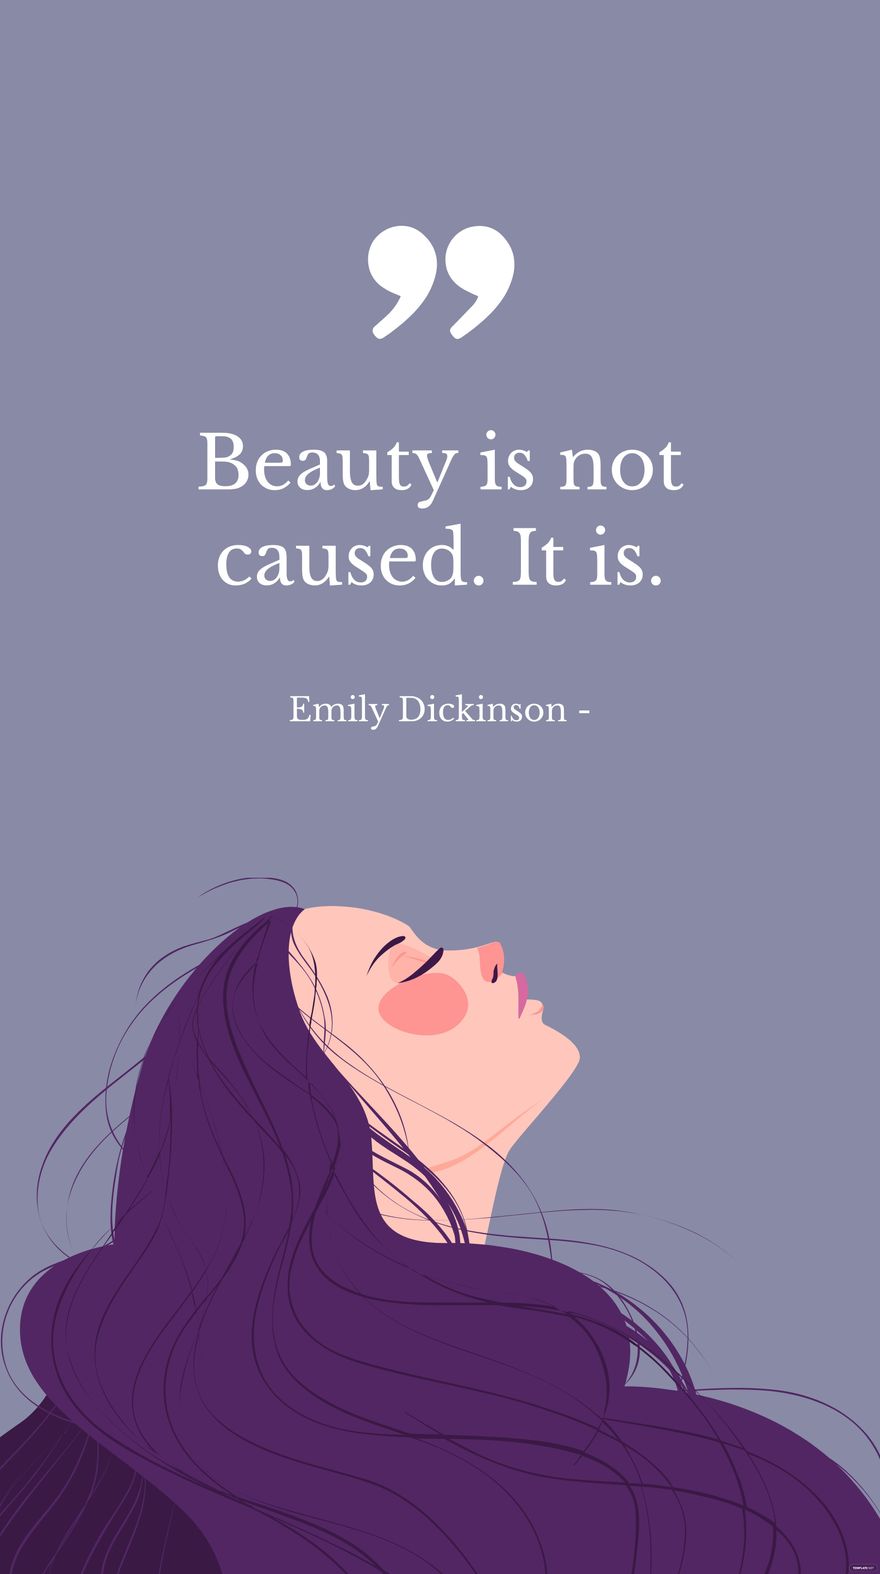 Free Emily Dickinson - Beauty is not caused. It is. in JPG